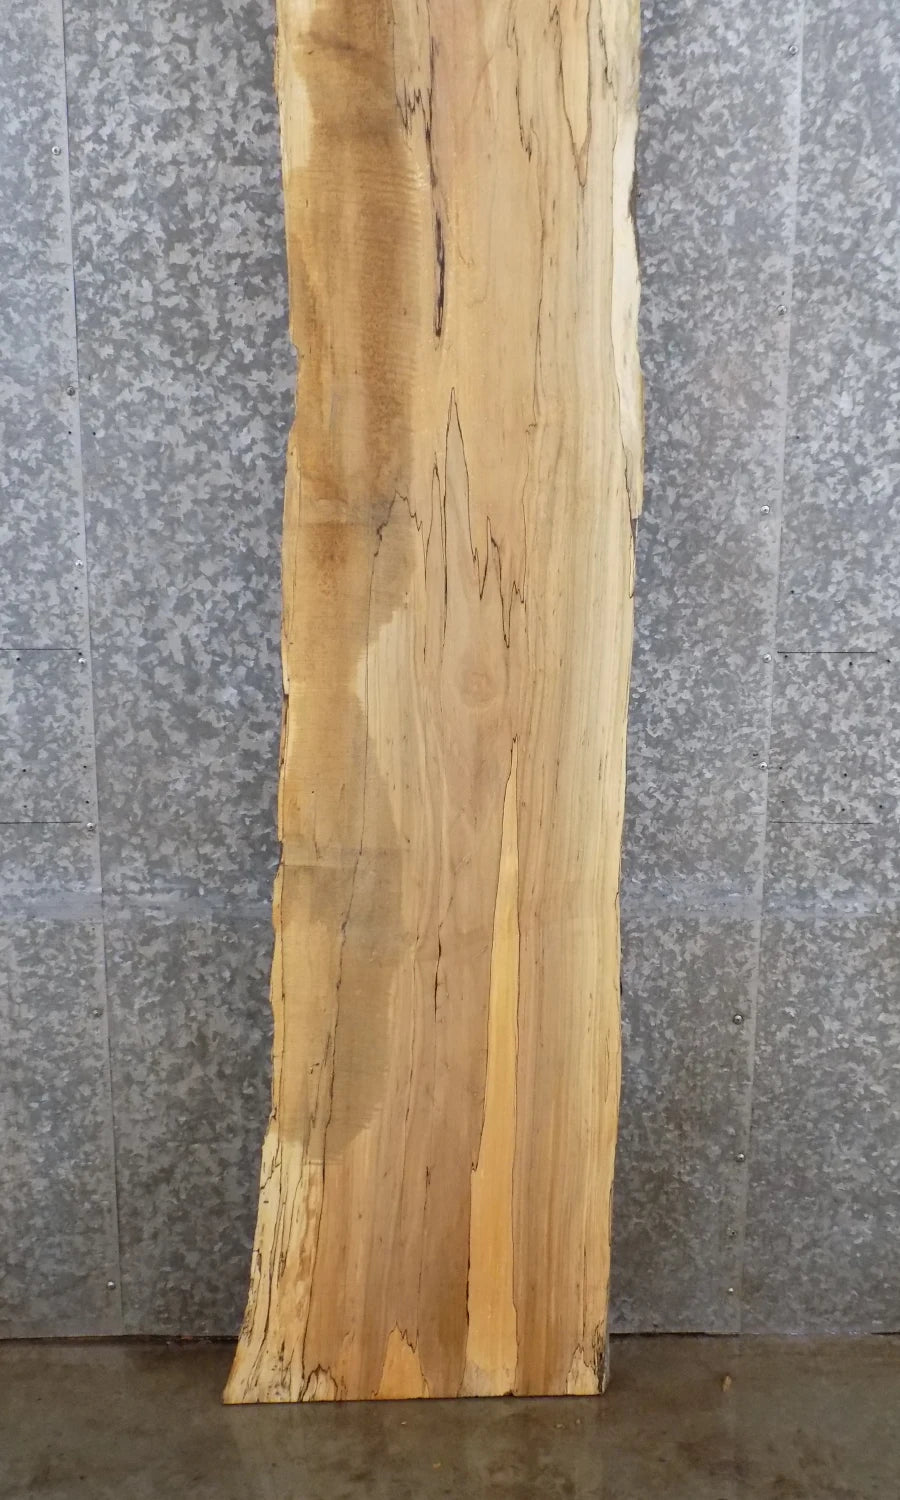 Live Edge Spalted Maple Bar/Counter Top Wood Slab CLOSEOUT 269